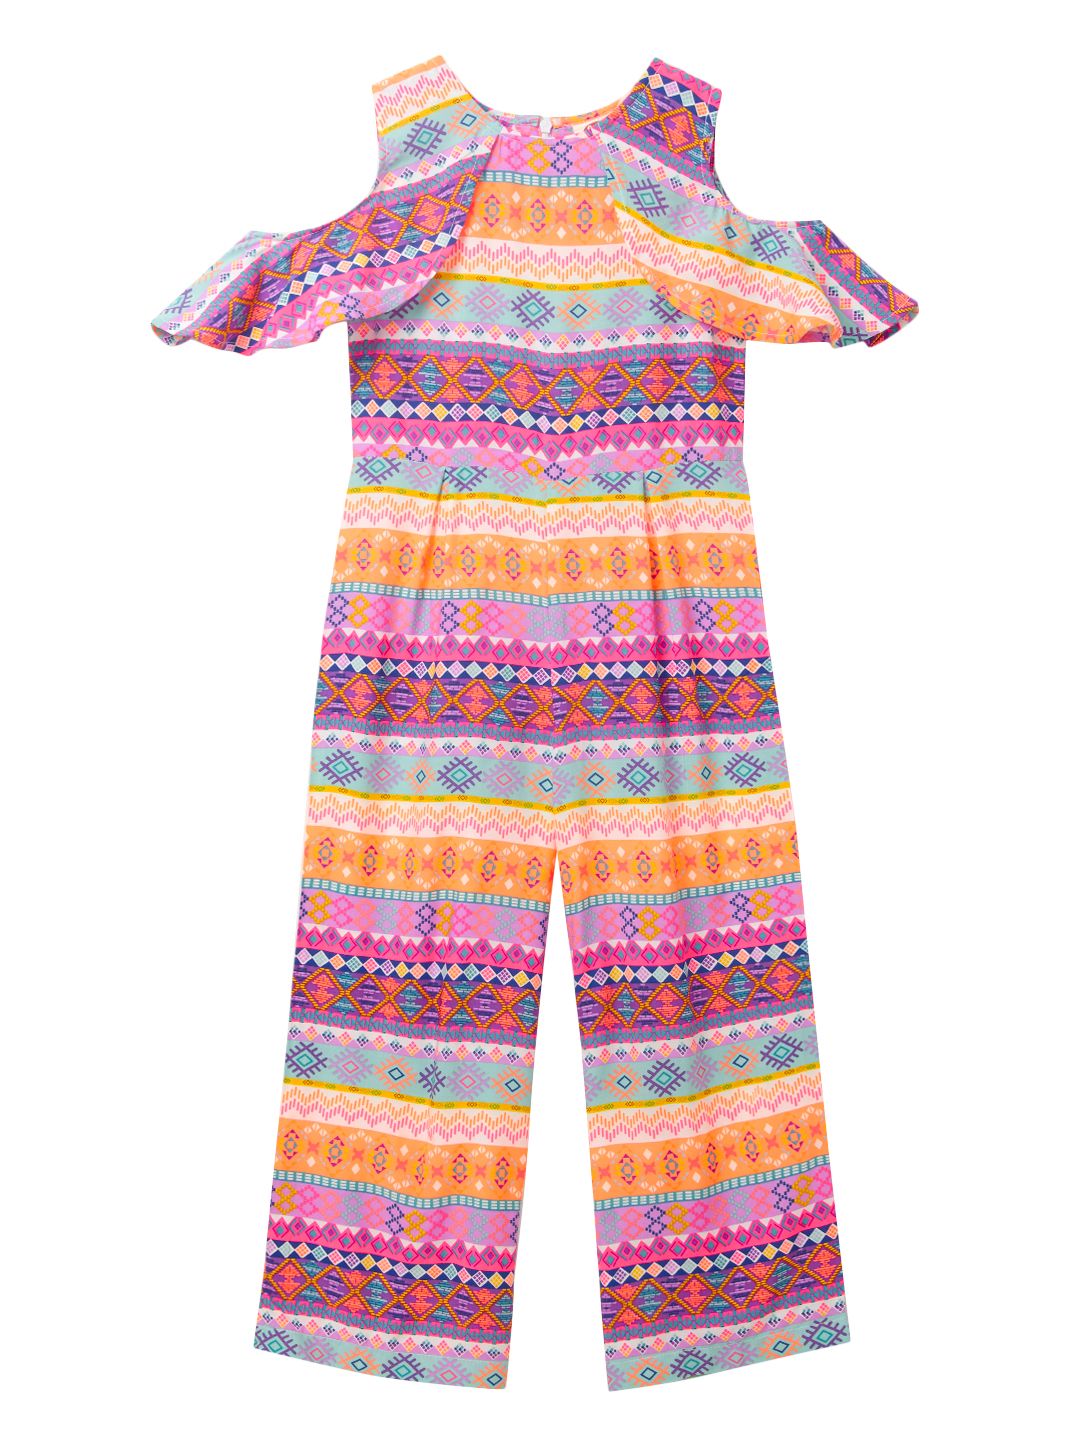 Buy ORIEX Polycotton Striped Jumpsuit Dungaree for Girls  Blue 1314  Year online  Looksgudin